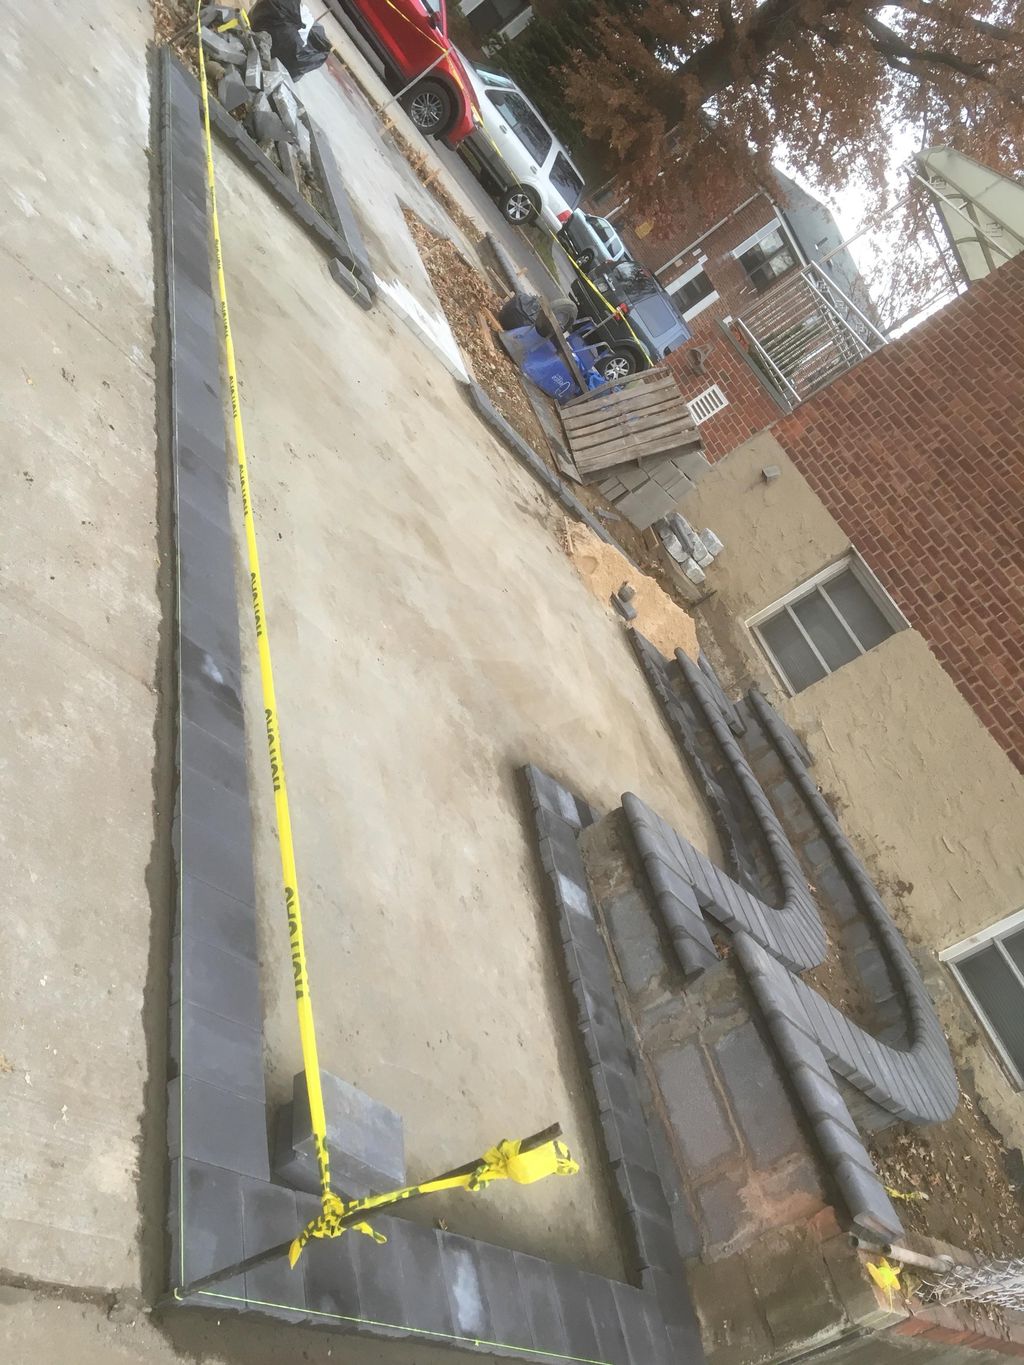 Douglas Contrucsion and waterproofing